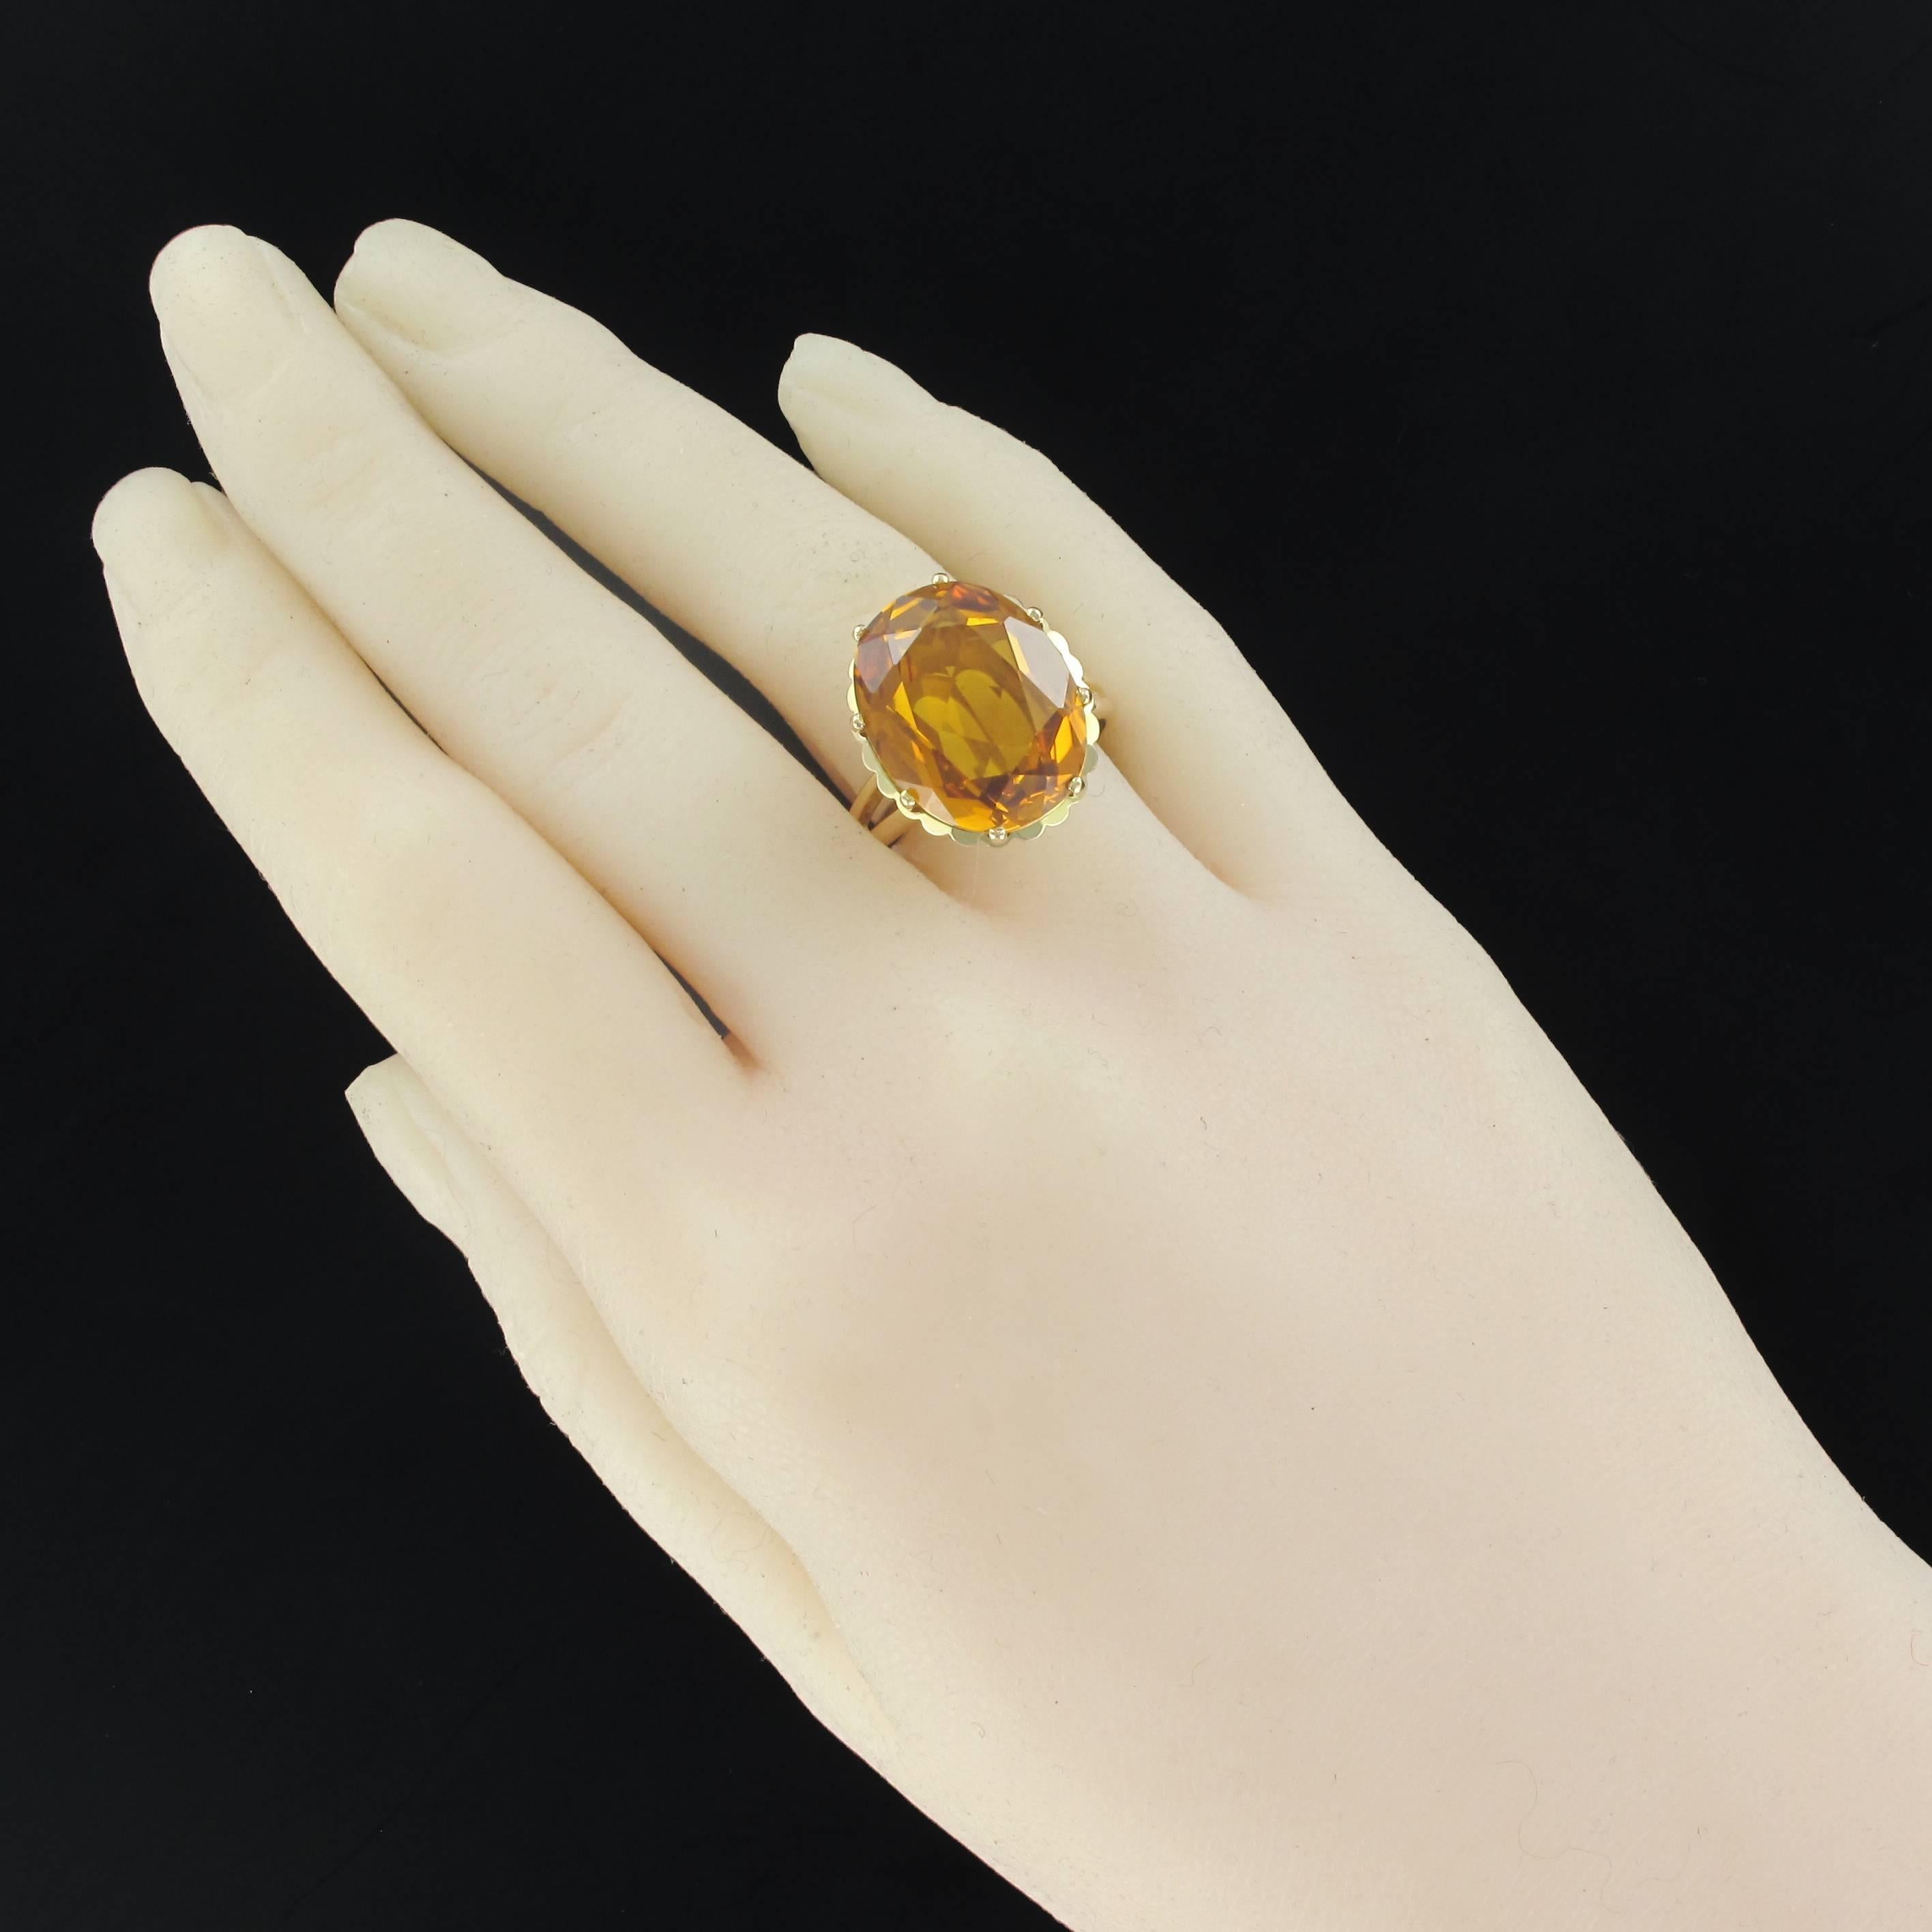 Ring in 18 carats yellow gold, eagle's head hallmark.
This ring comes straight from the 1960s. It is set with claws of an oval citrine on an openwork basket. The ring has a spring ring that can be removed if necessary.
Weight of the citrine: 8.90